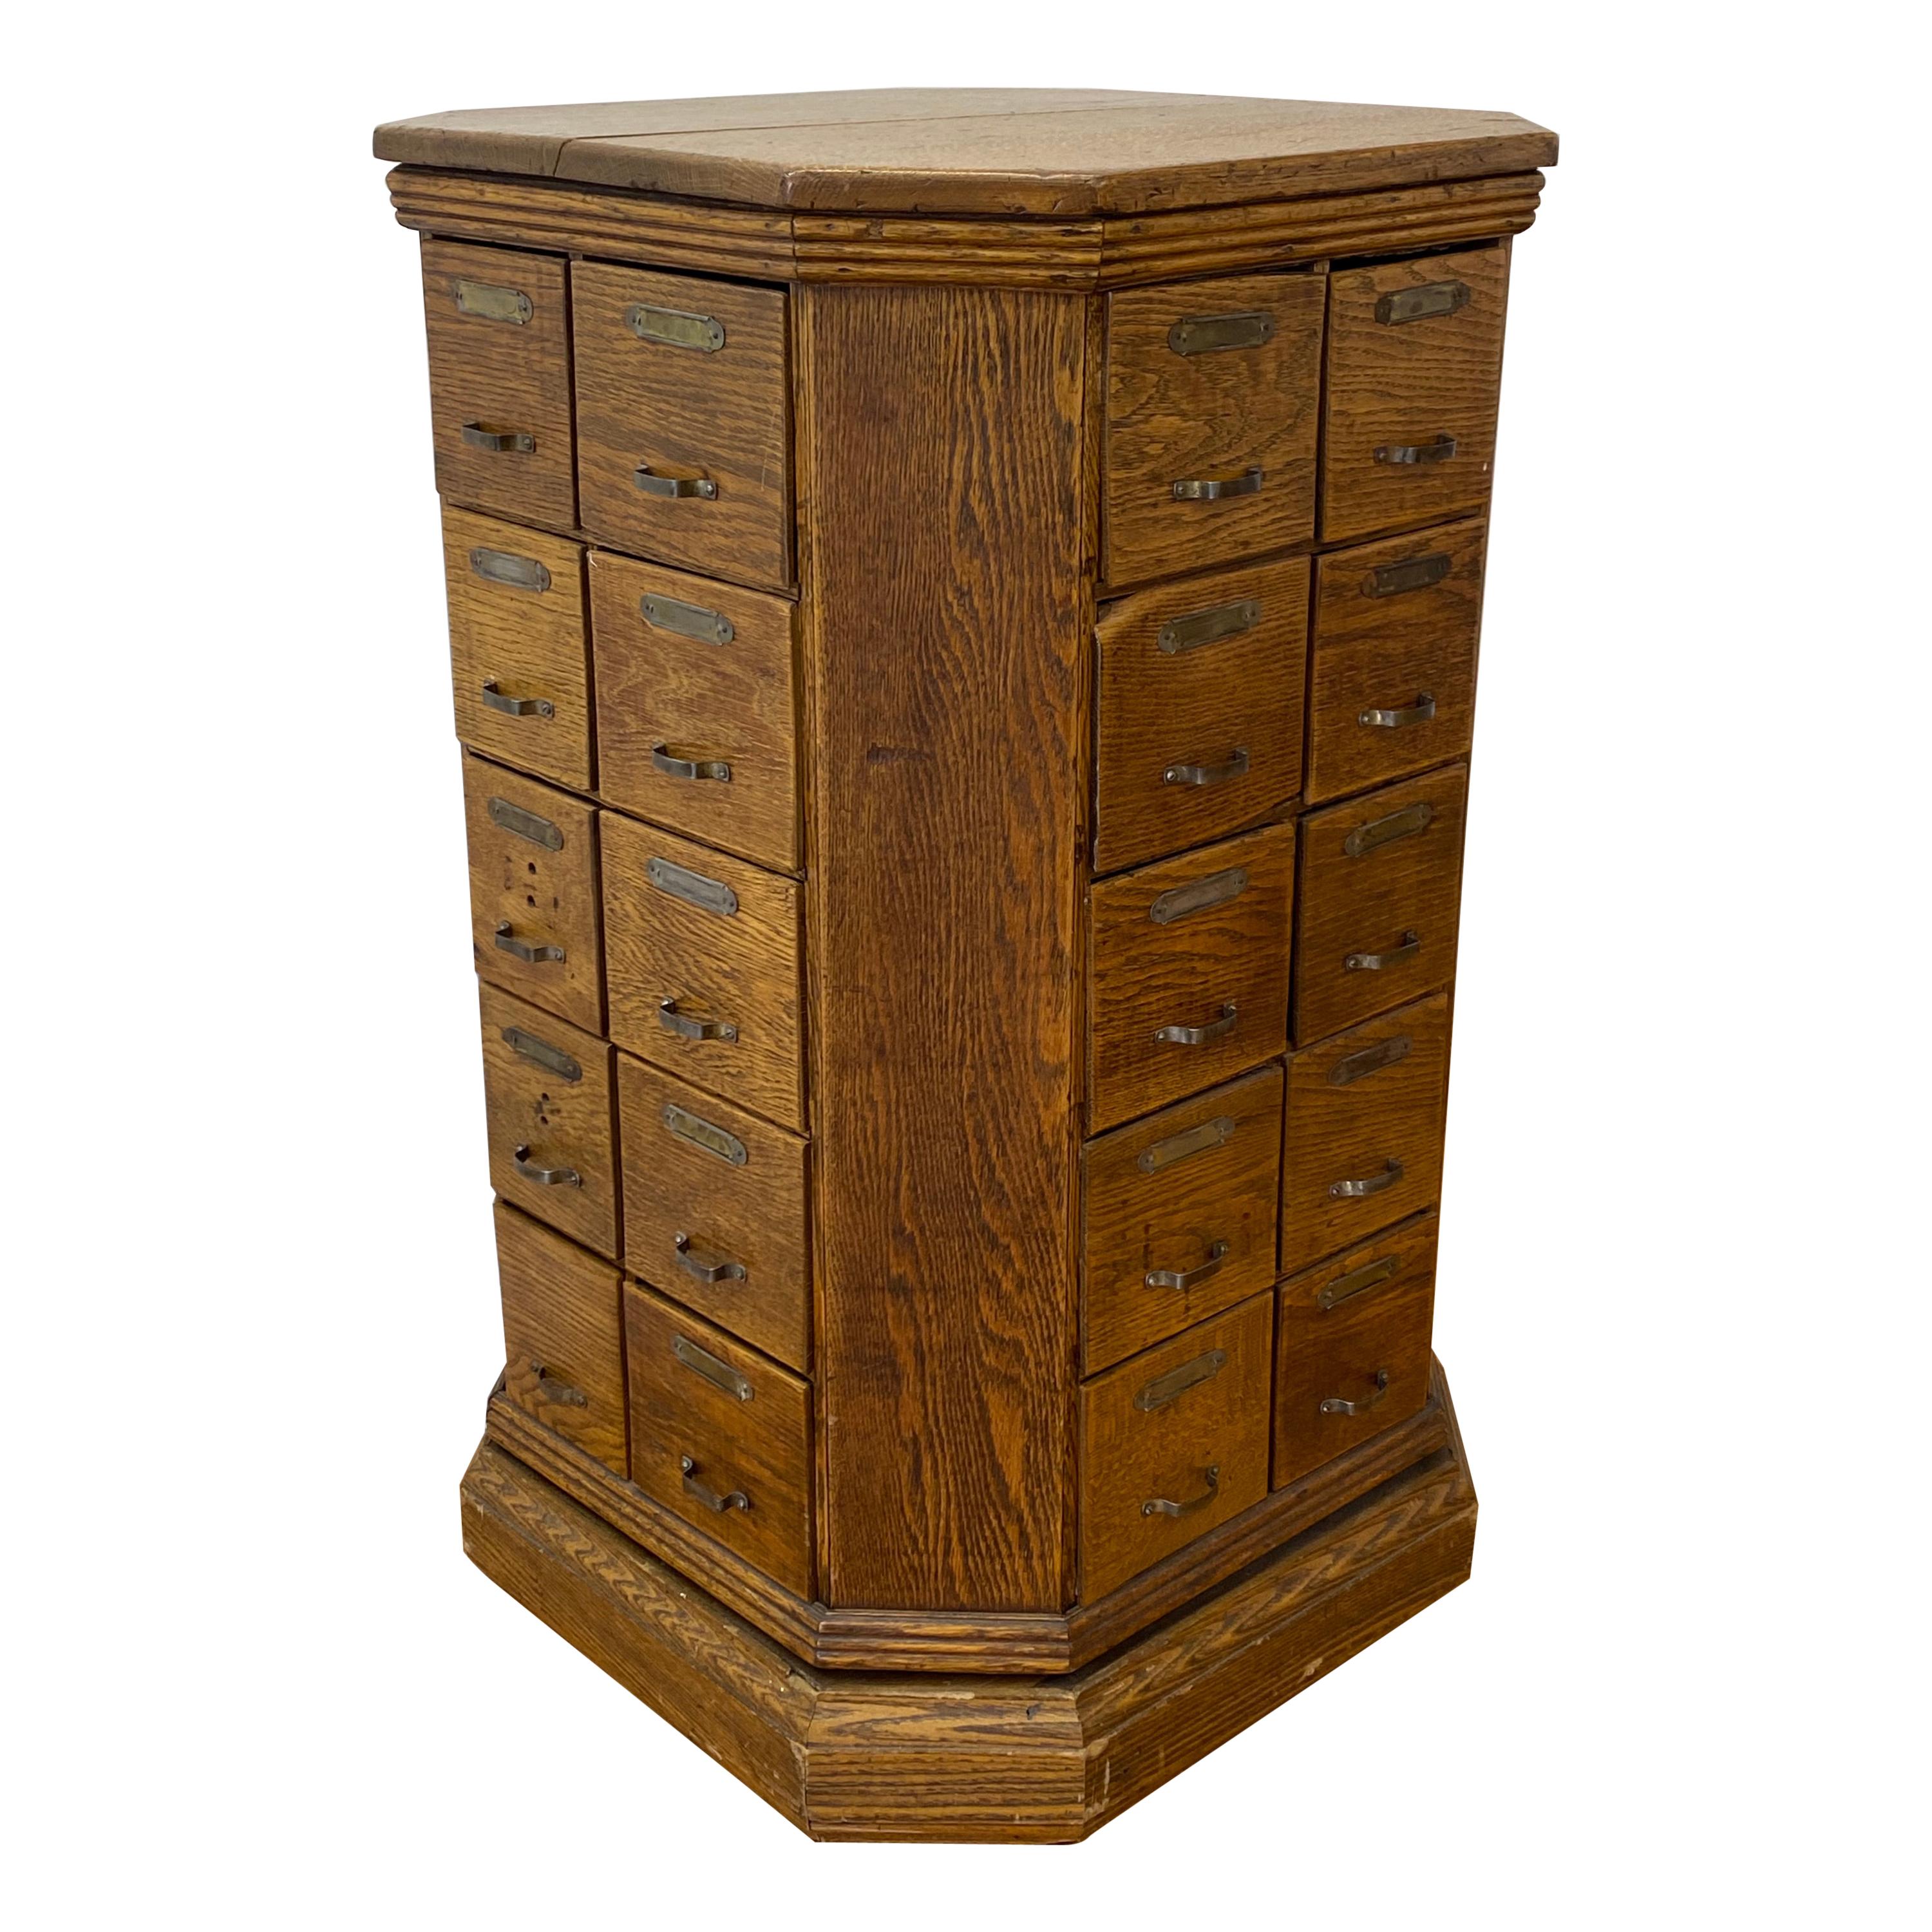 Early 20th Century Tennessee Oak Hardware Cabinet, circa 1910